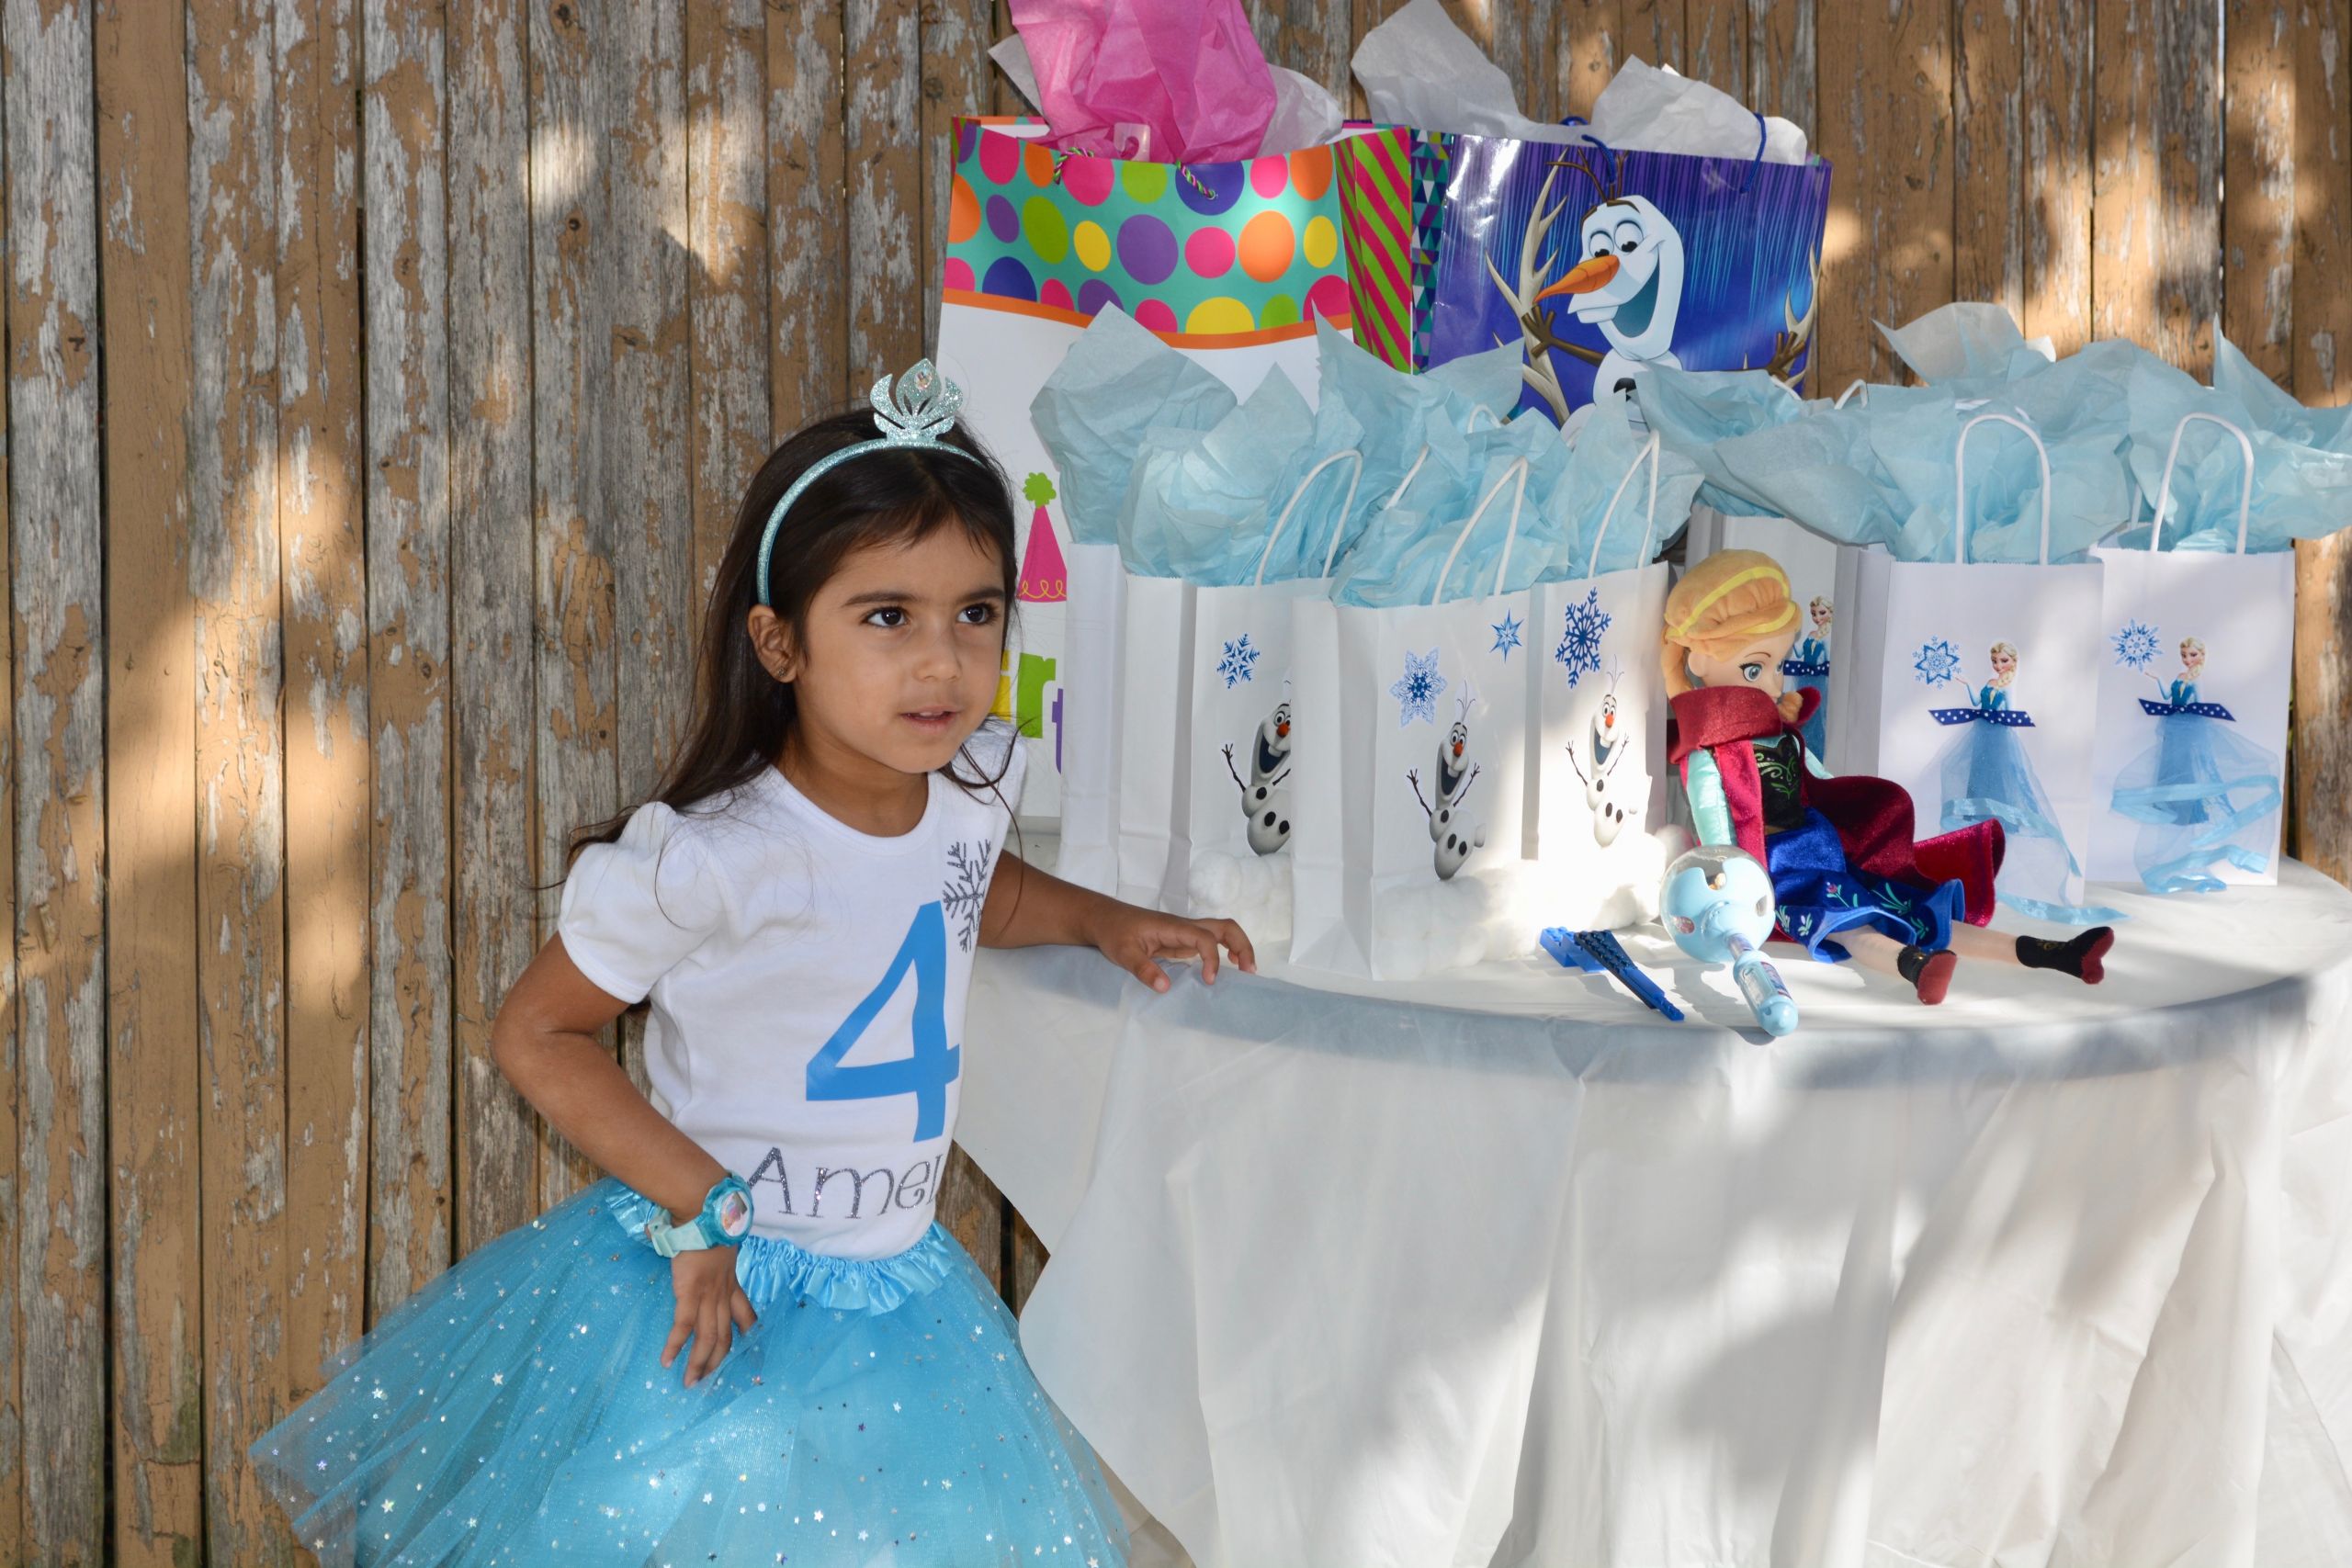 Frozen Birthday Decoration Ideas
 How to Prep the Ultimate Frozen Themed Birthday Party